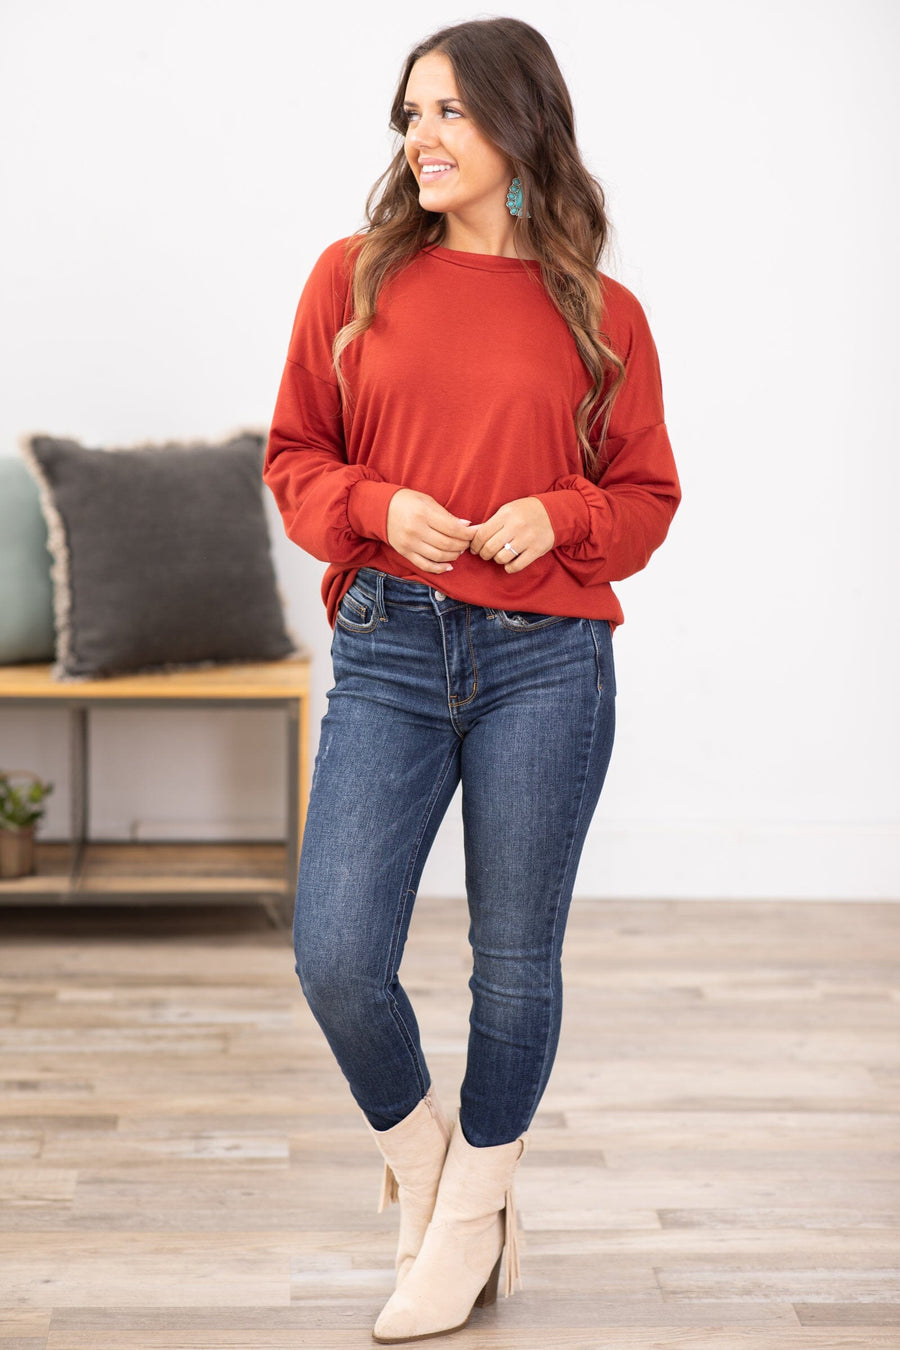 Cranberry Crew Neck Long Sleeve Top - Filly Flair